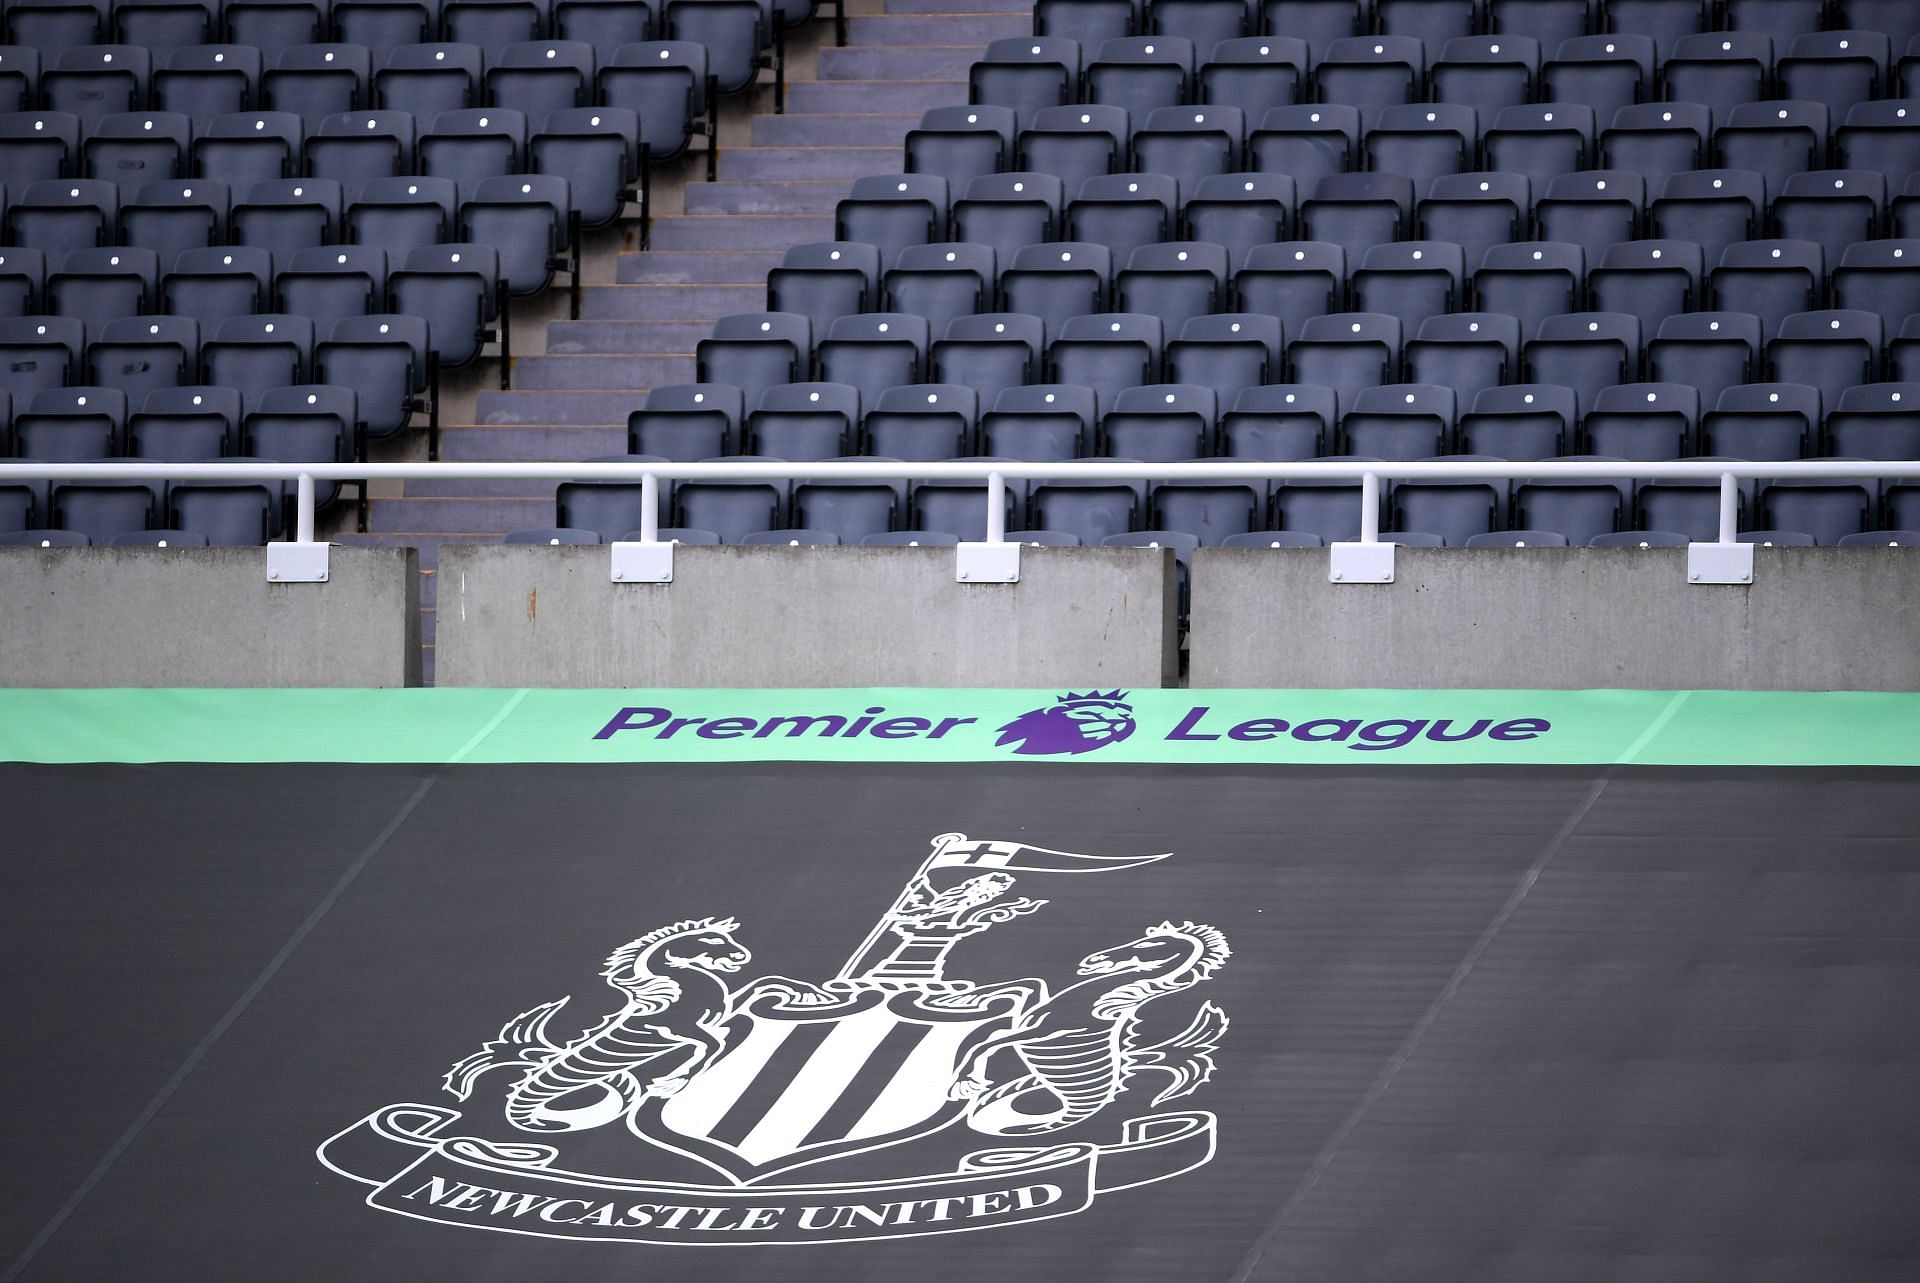 Newcastle United are the richest club in the Premier League. (Photo by Laurence Griffiths/Getty Images)